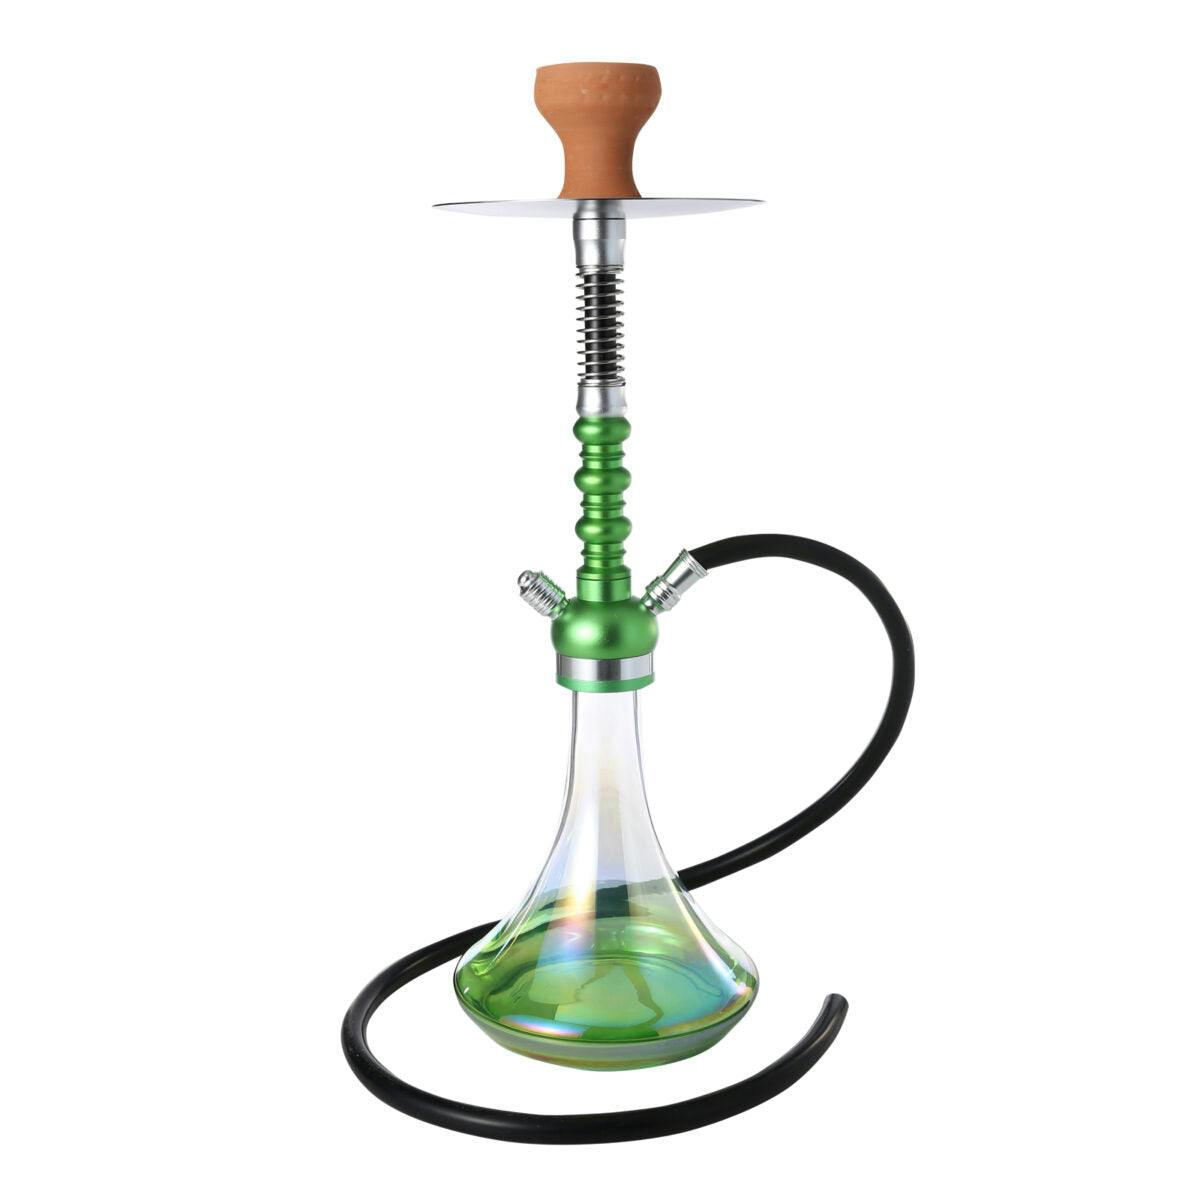 Product for sale: MD2210 21" Hookah